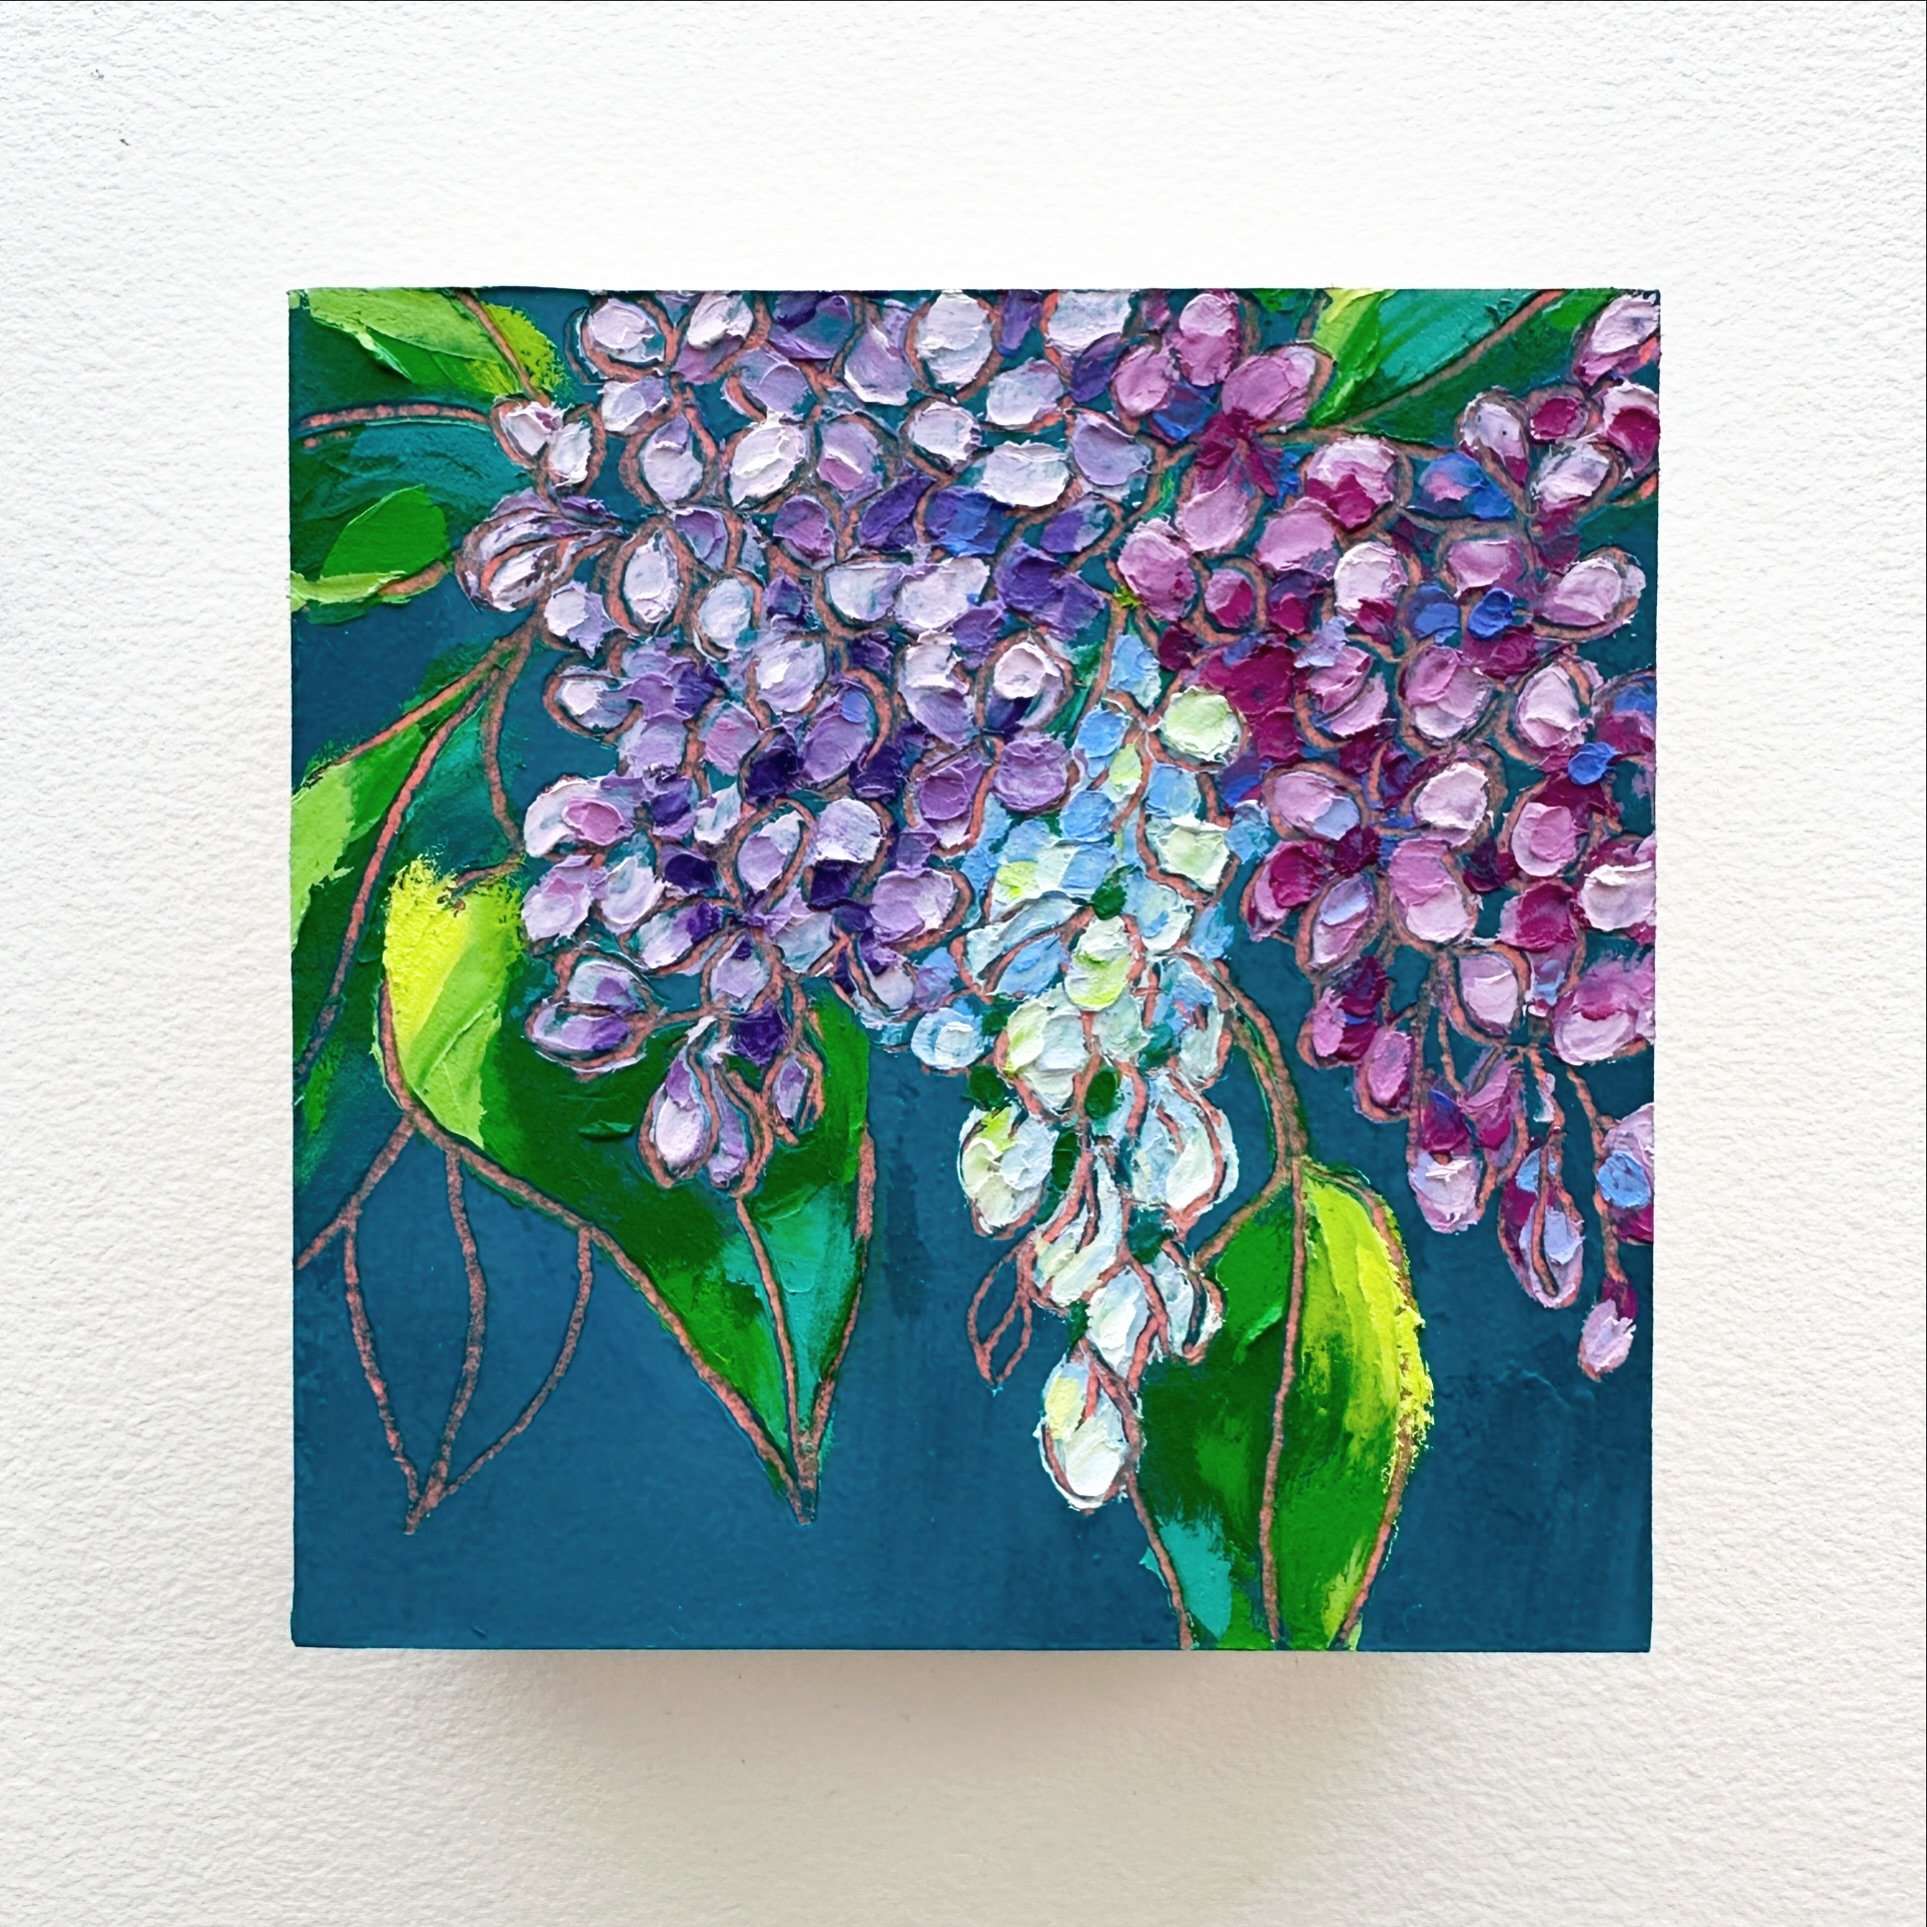 Day 49, The 100 Day Project 2024 @dothe100dayproject

Lilacs and teal. I went with a dark phthalo teal for this one. 

For days 41-50 of my 100 Day Project, I&rsquo;ll be going back to painting my beloved florals, but with a twist. Every day in my In